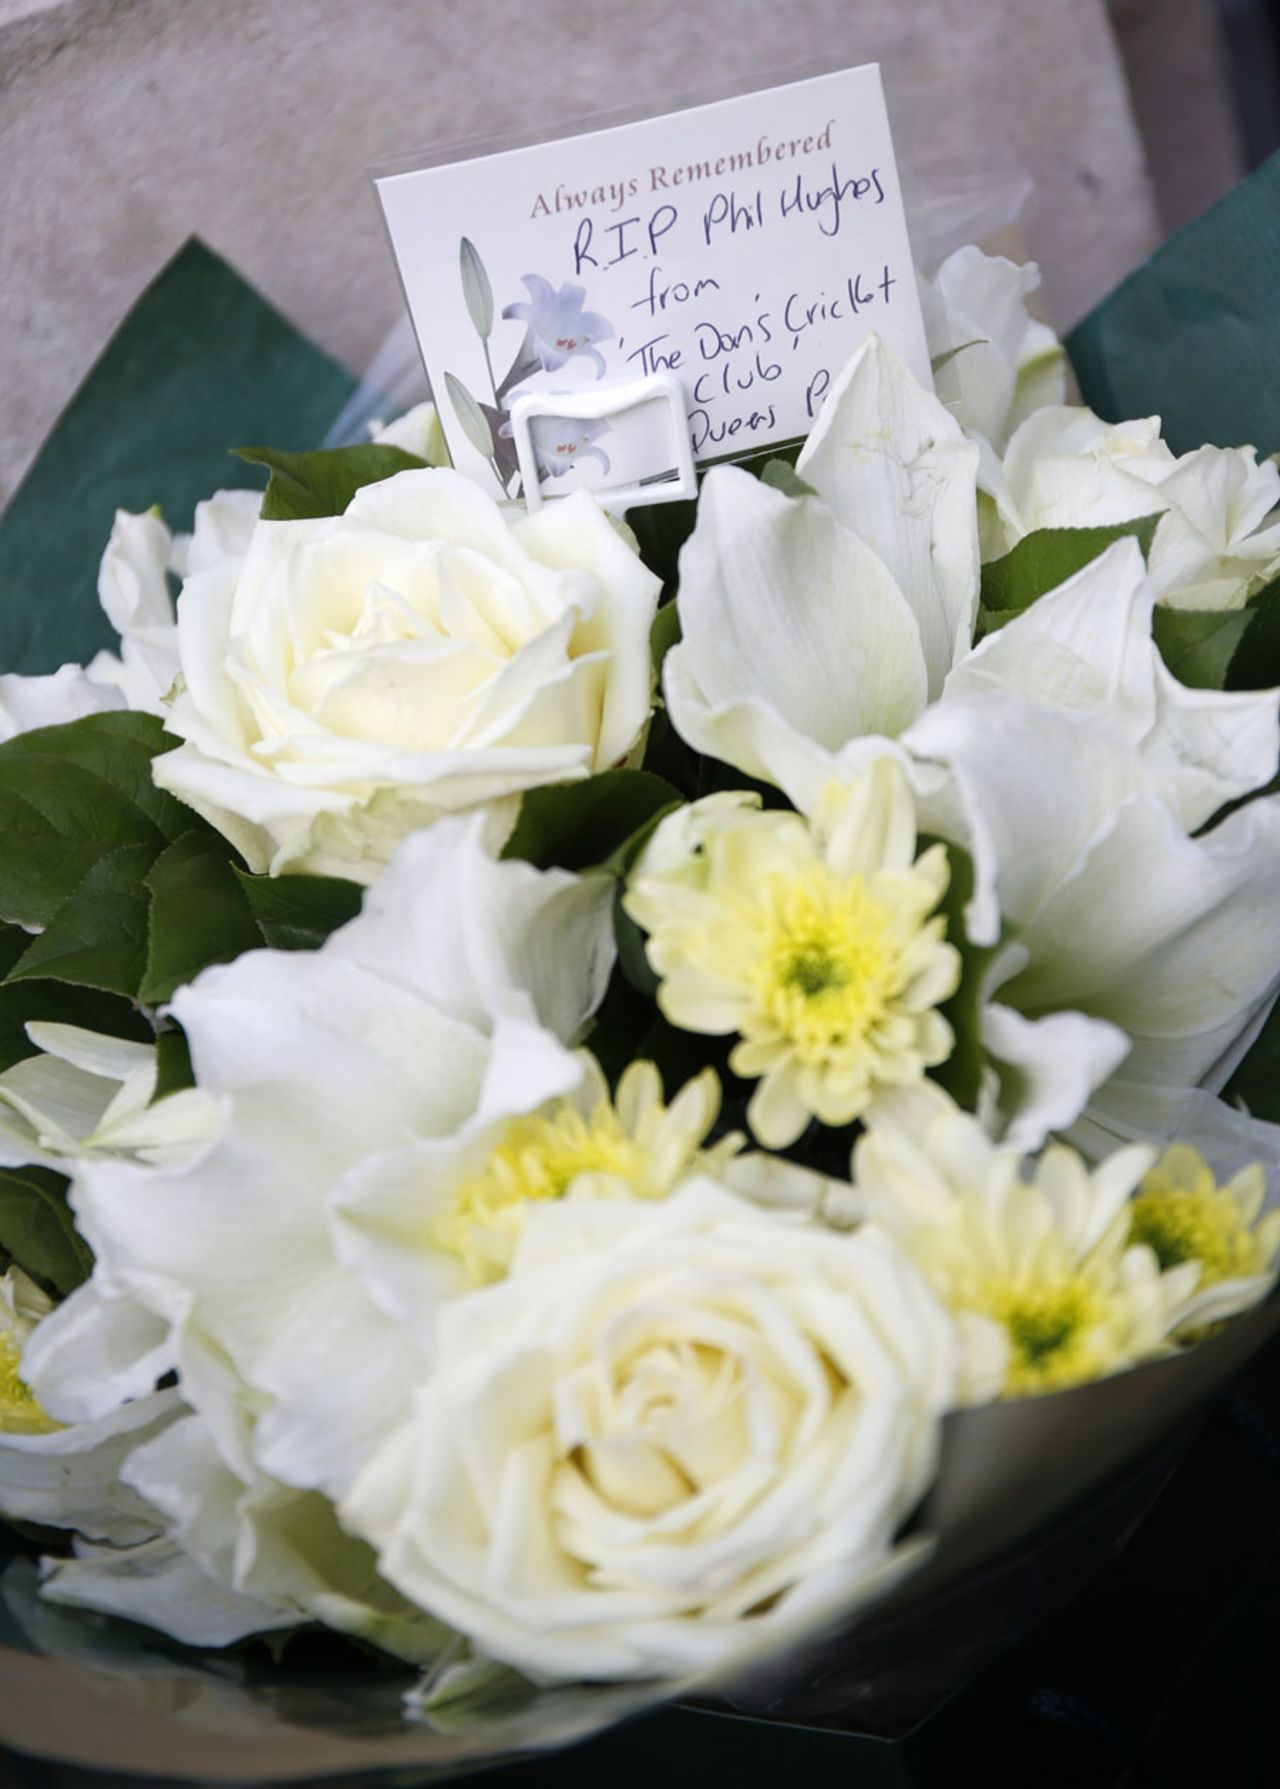 Floral tributes to Phillip Hughes, Lord's, November 27, 2014